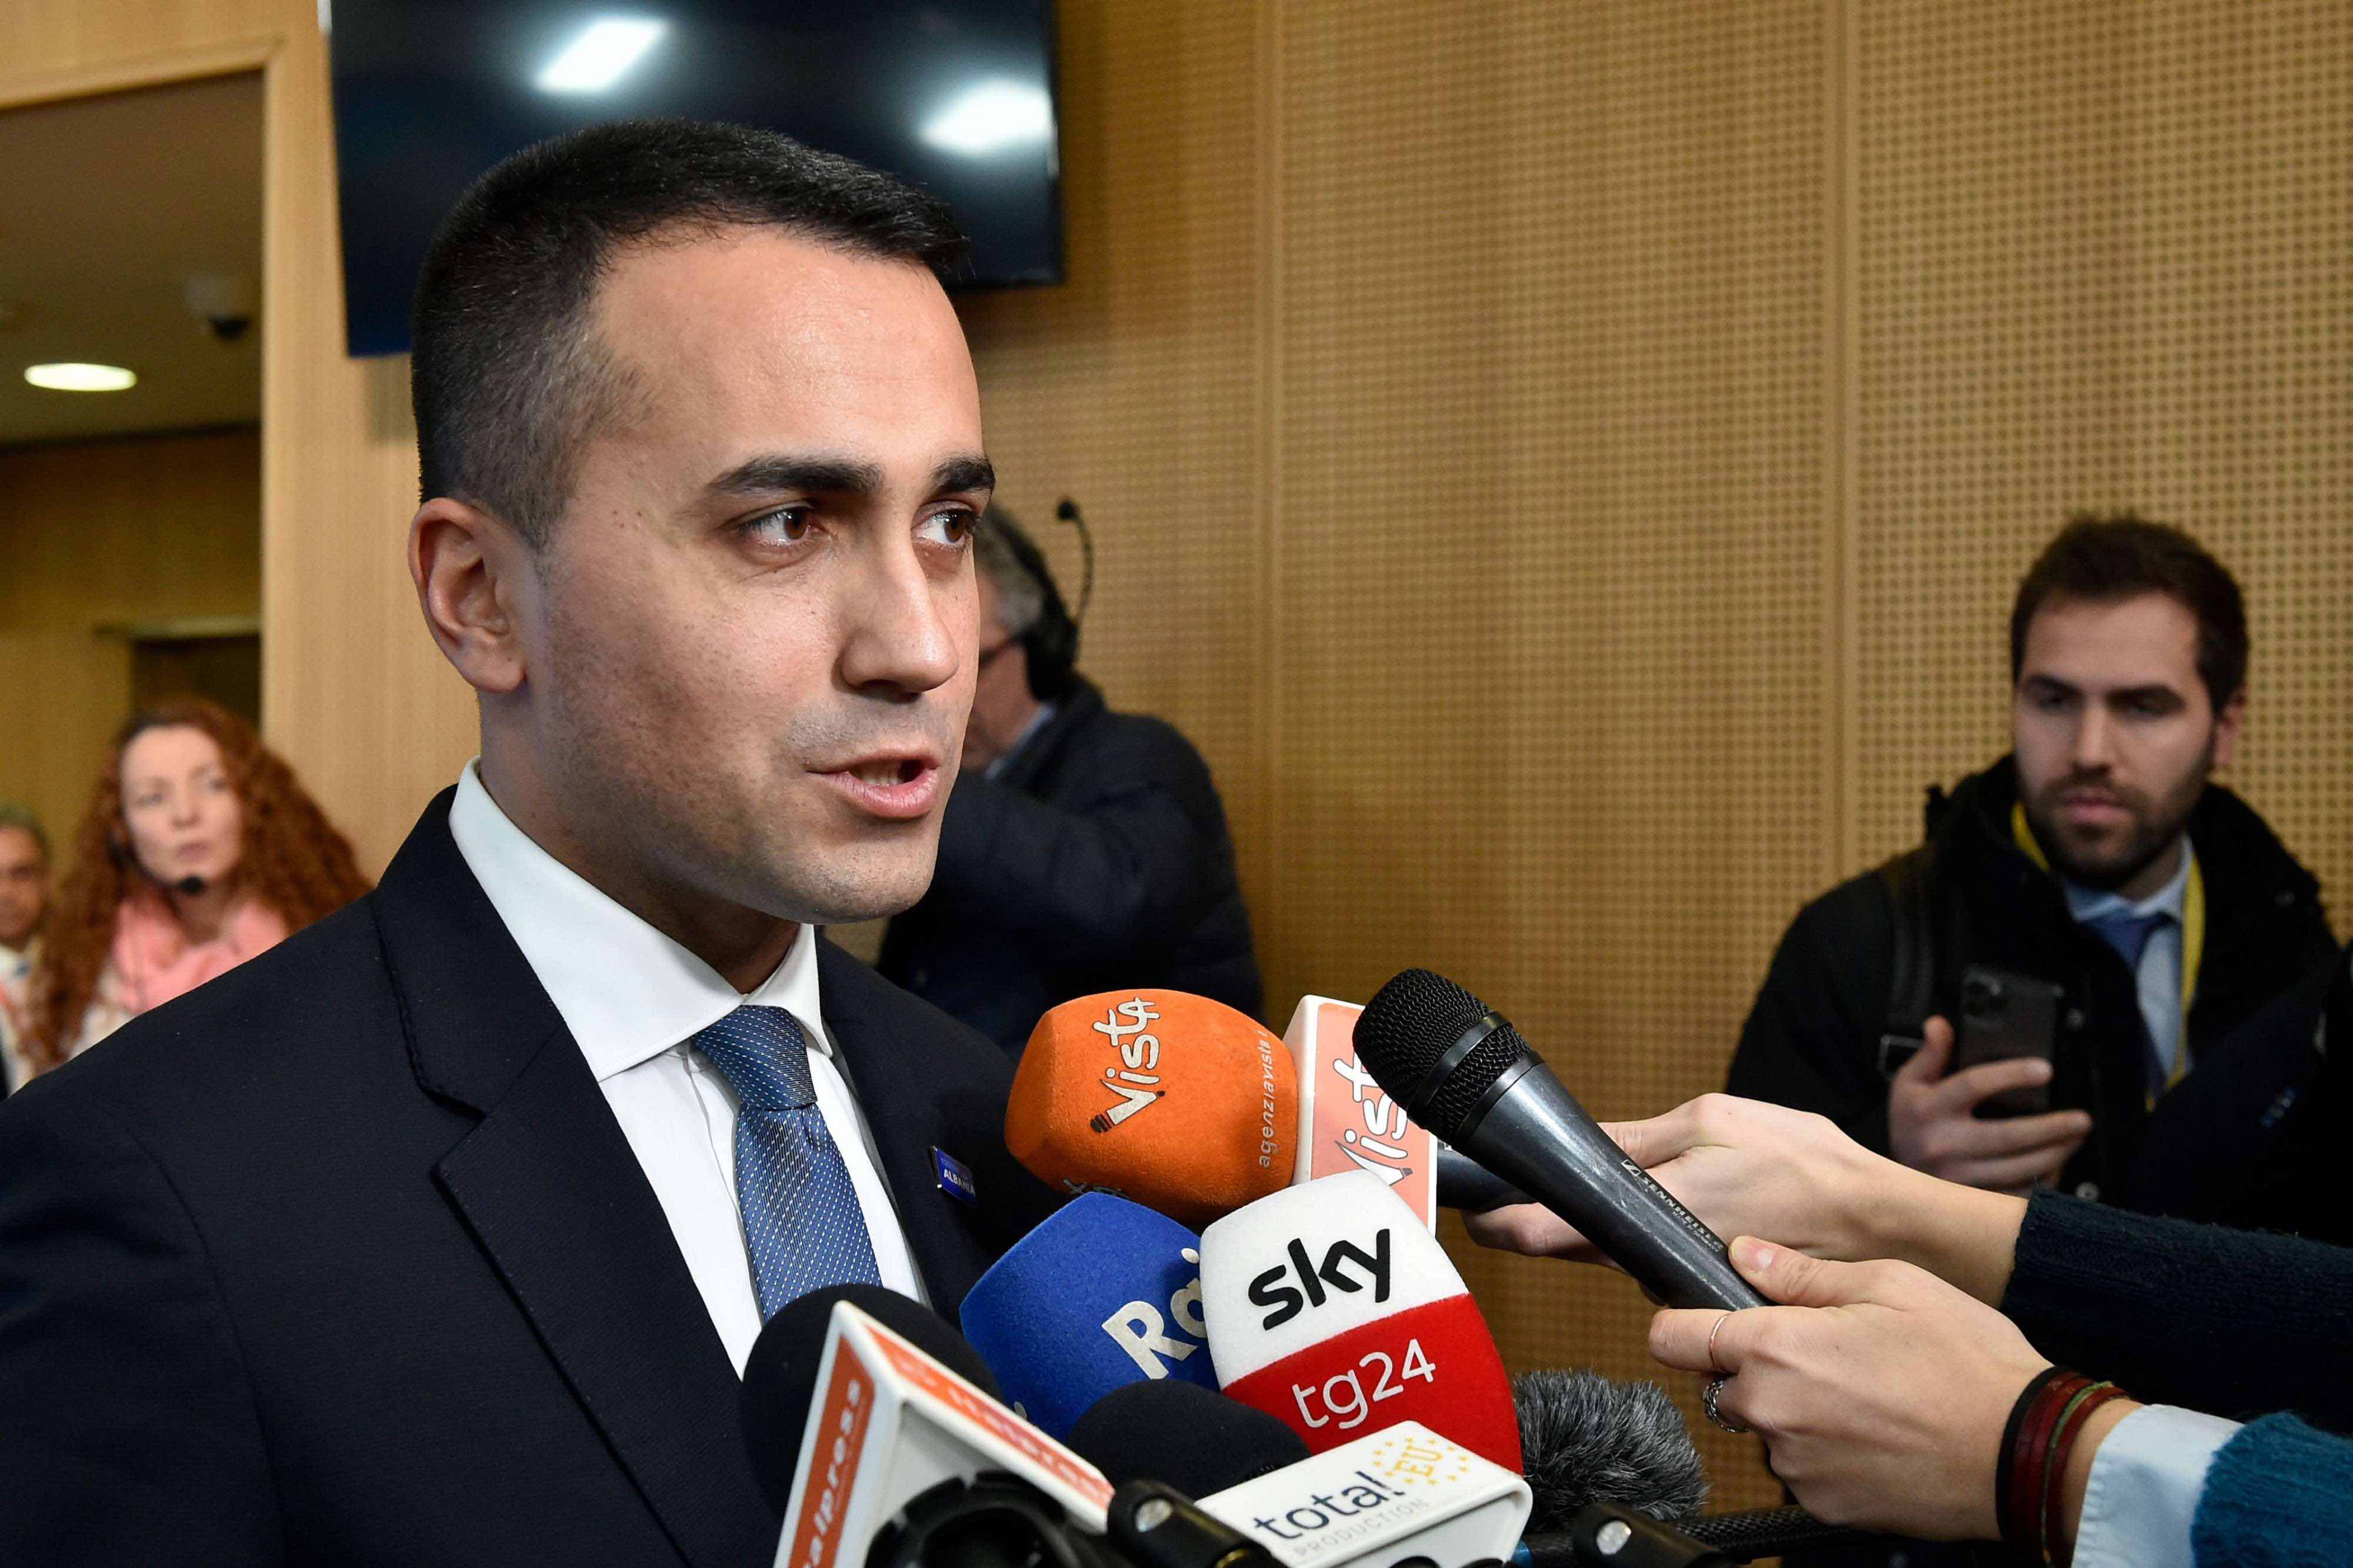 "We all agreed to create a mission to block the entry of arms into Libya, with rules of engagement," di Maio said.